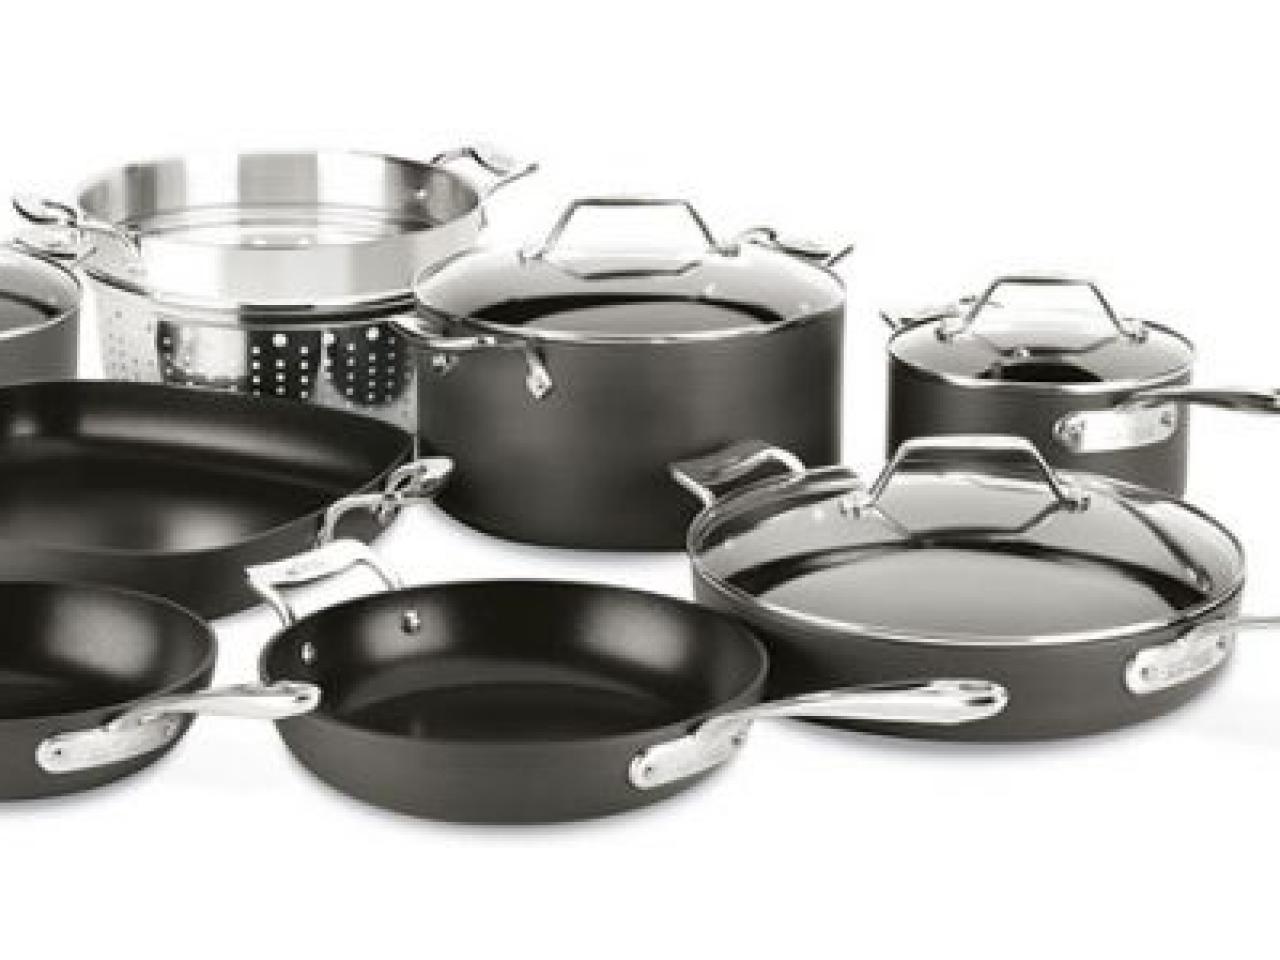 https://food.fnr.sndimg.com/content/dam/images/food/products/2021/9/20/rx_12-piece-hard-anodized-cookware-set-.jpeg.rend.hgtvcom.1280.960.suffix/1632164642874.jpeg